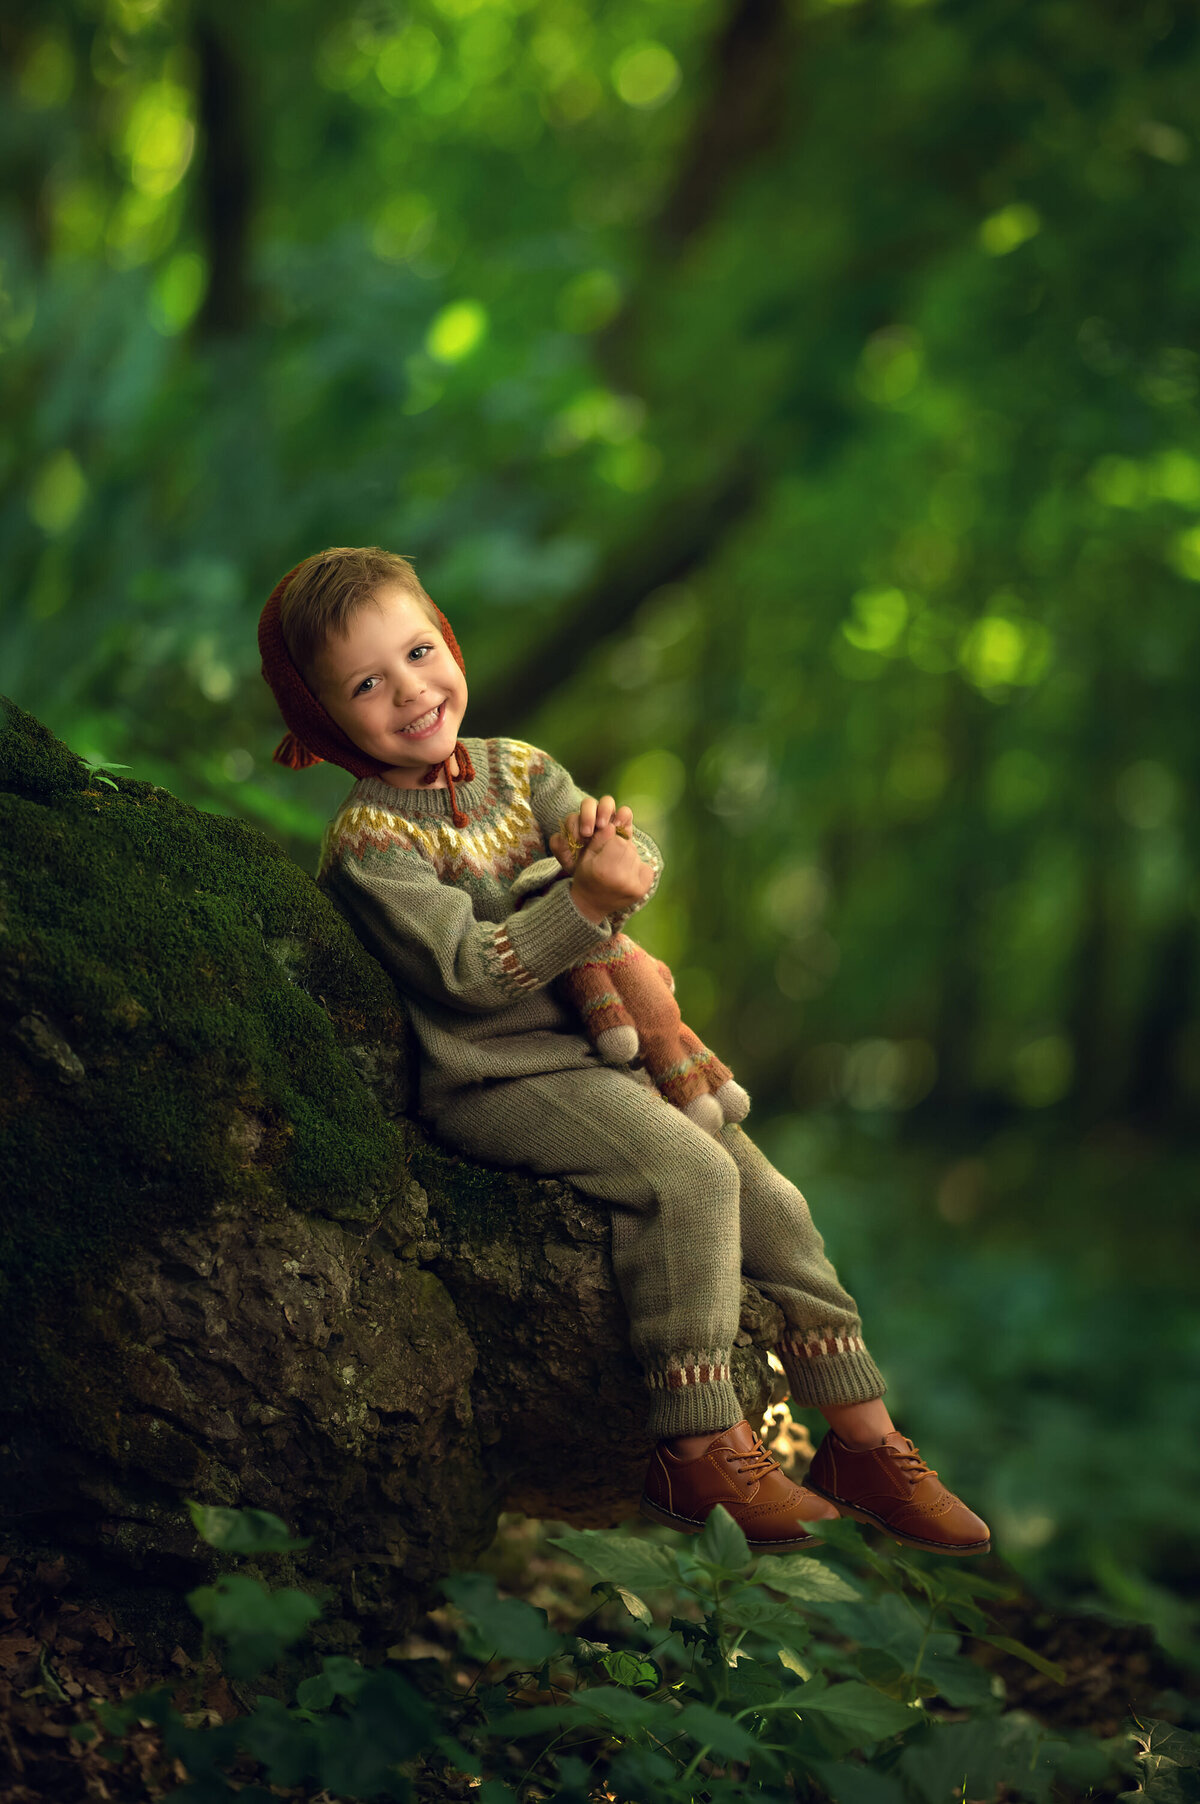 A young boy in green, organic costuming poses with his stuffed animal in our fantasy-inspired enchanted forest portraits.